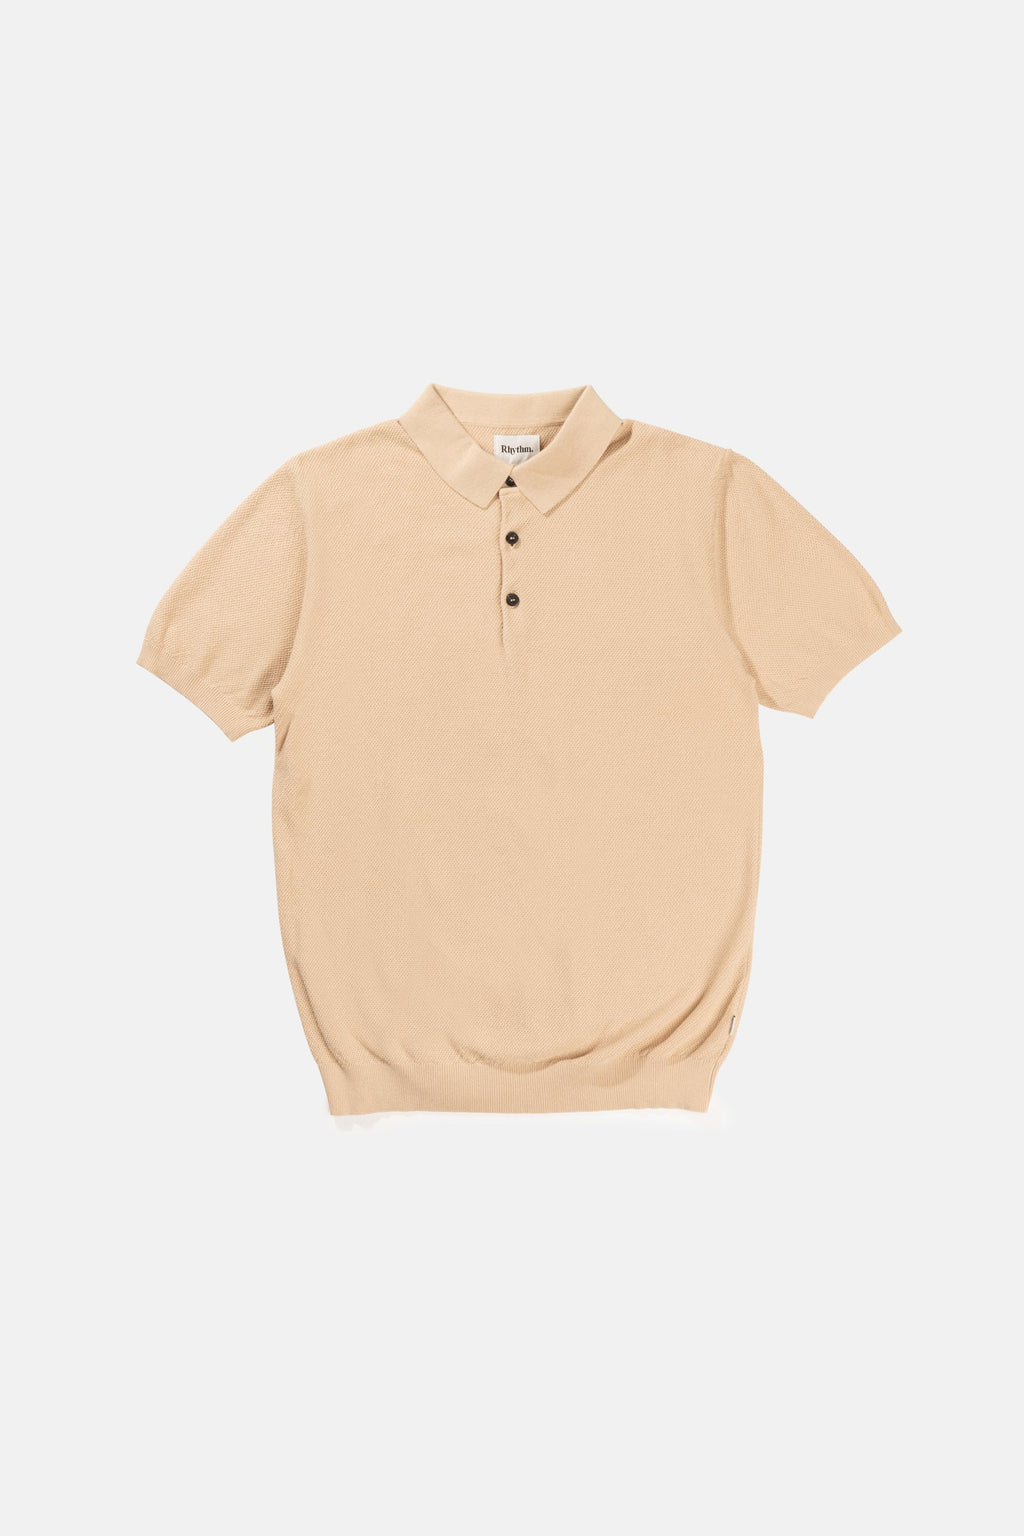 HIIT x CLUBHAUS S/S Polo Shirt - Sand